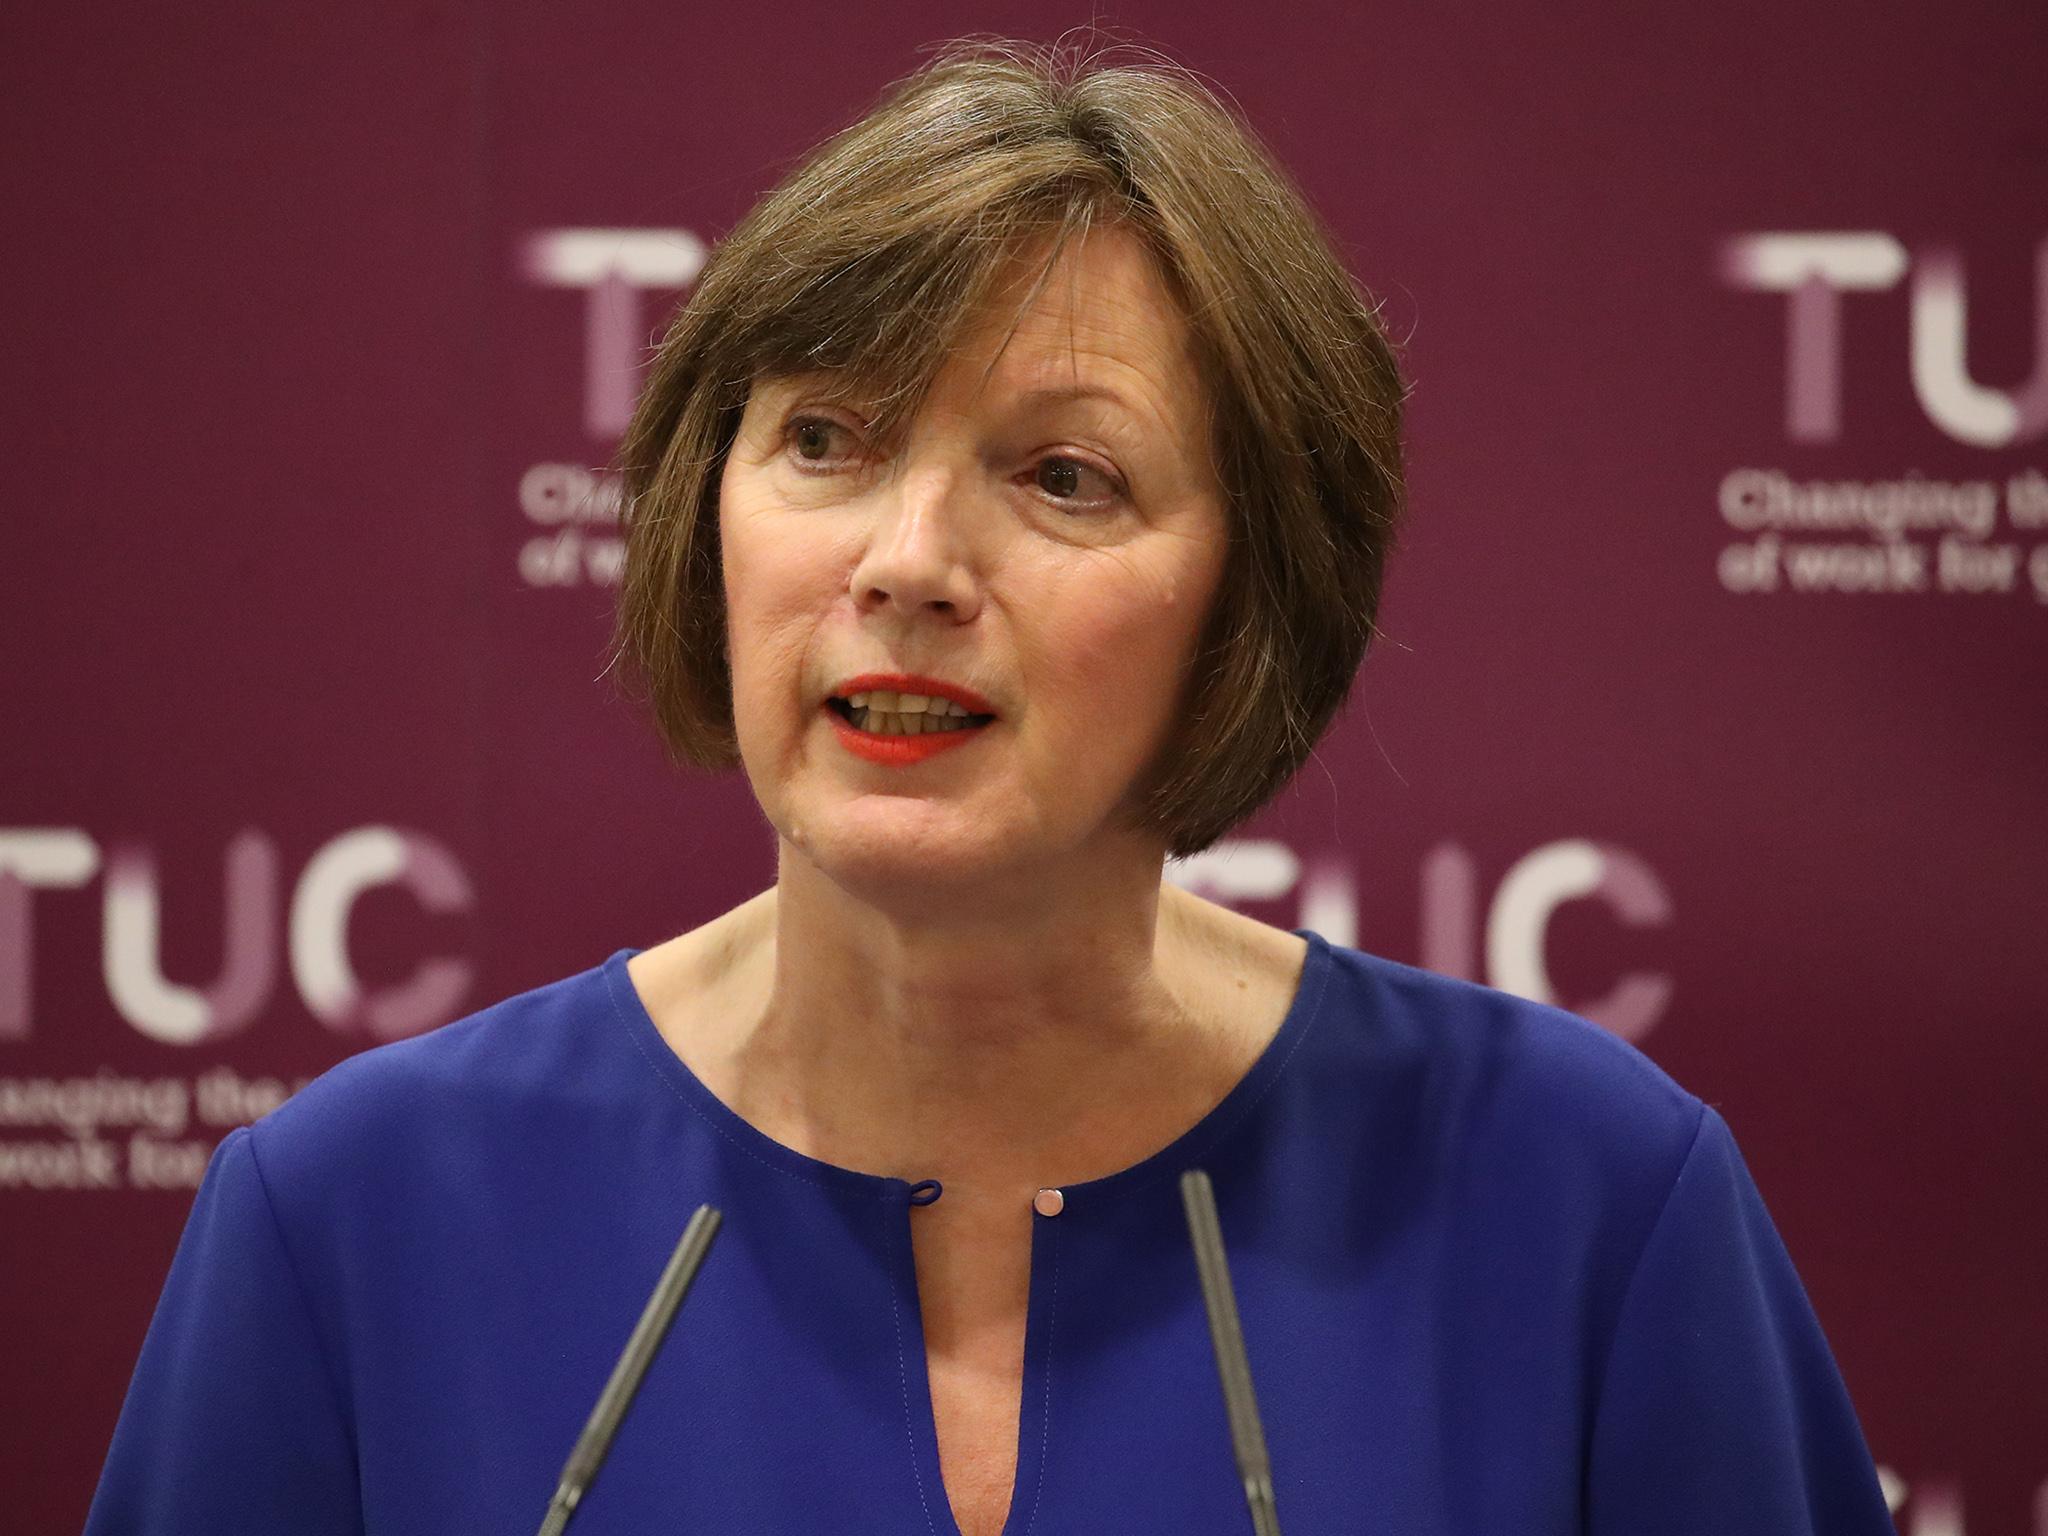 TUC leader Frances O’Grady vowed to “throw the kitchen sink” at protecting employment rights